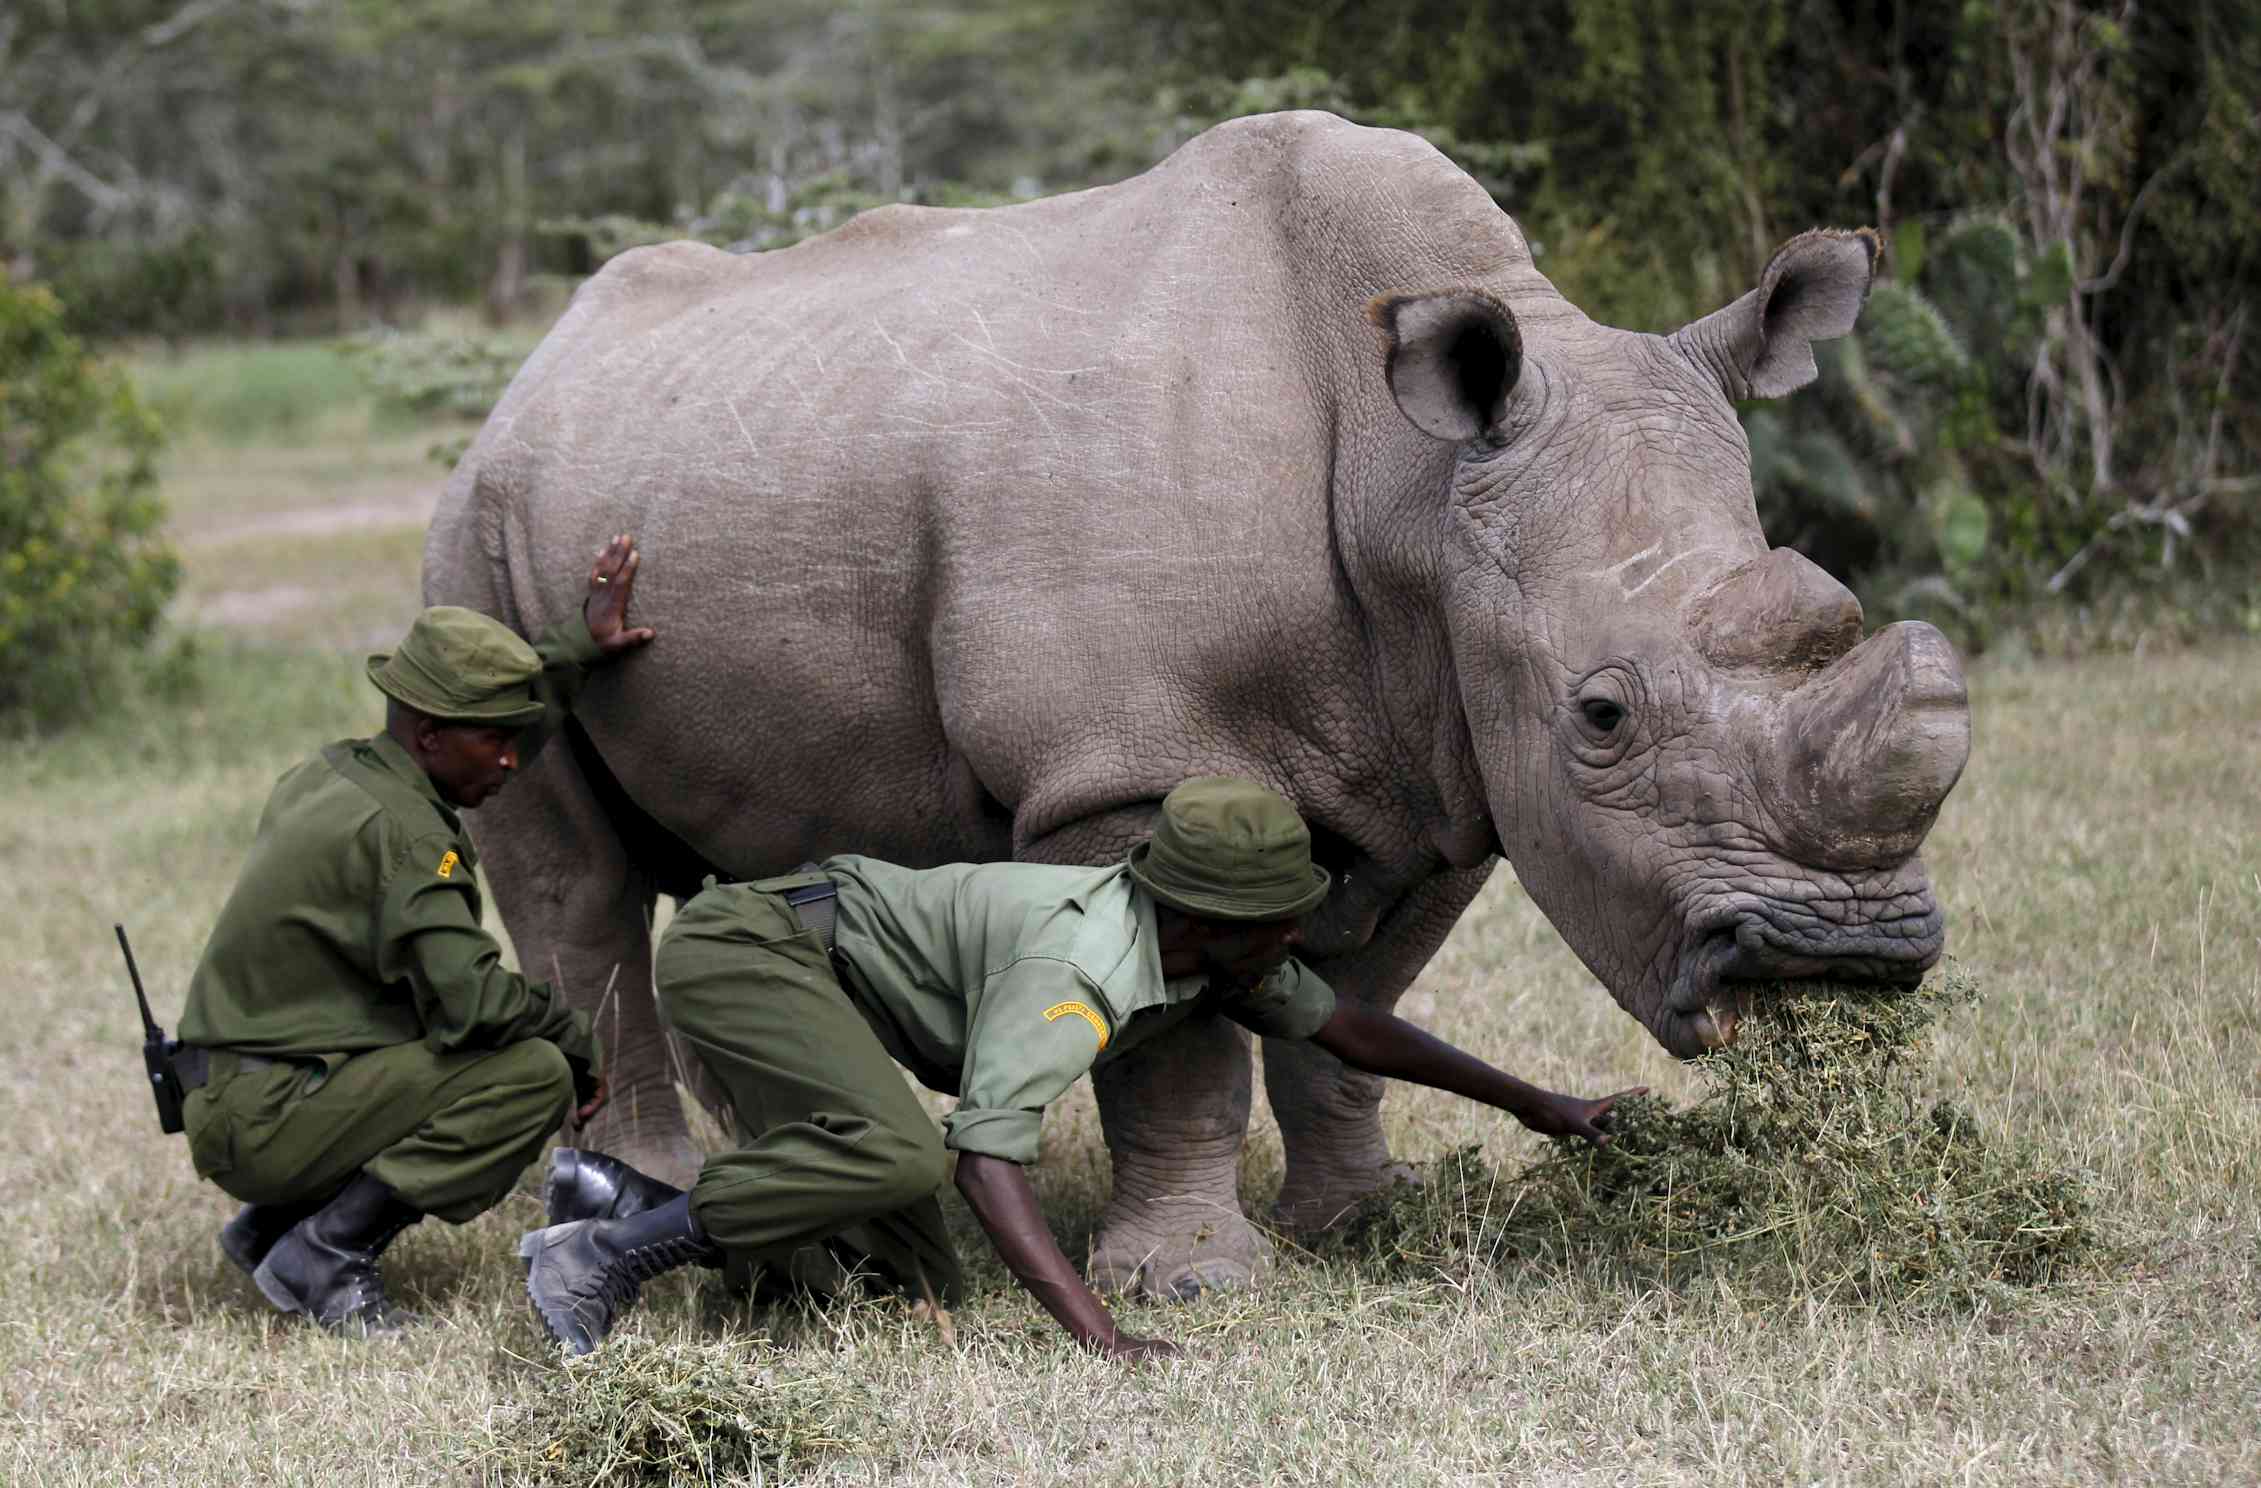 Spycam rhinos to take on poachers with devices hidden in their horns